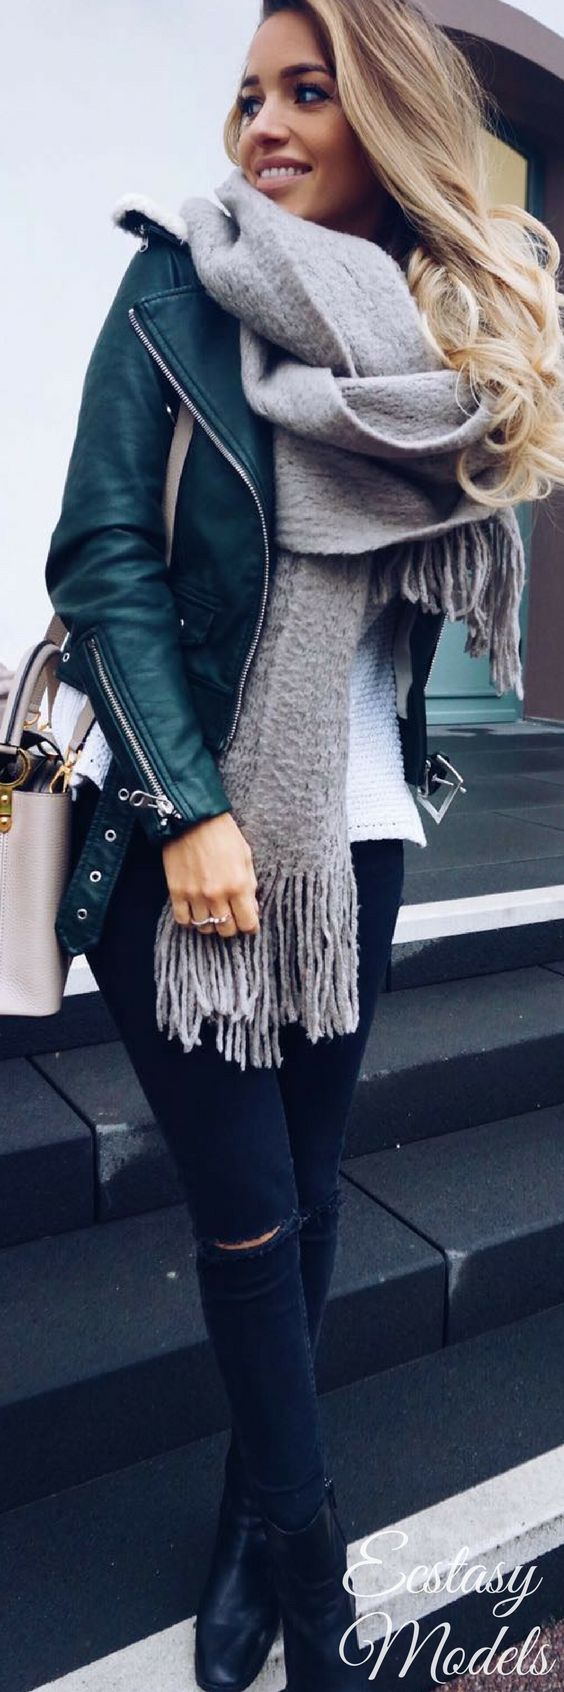 How to Look Great When It’s Really Cold Outside